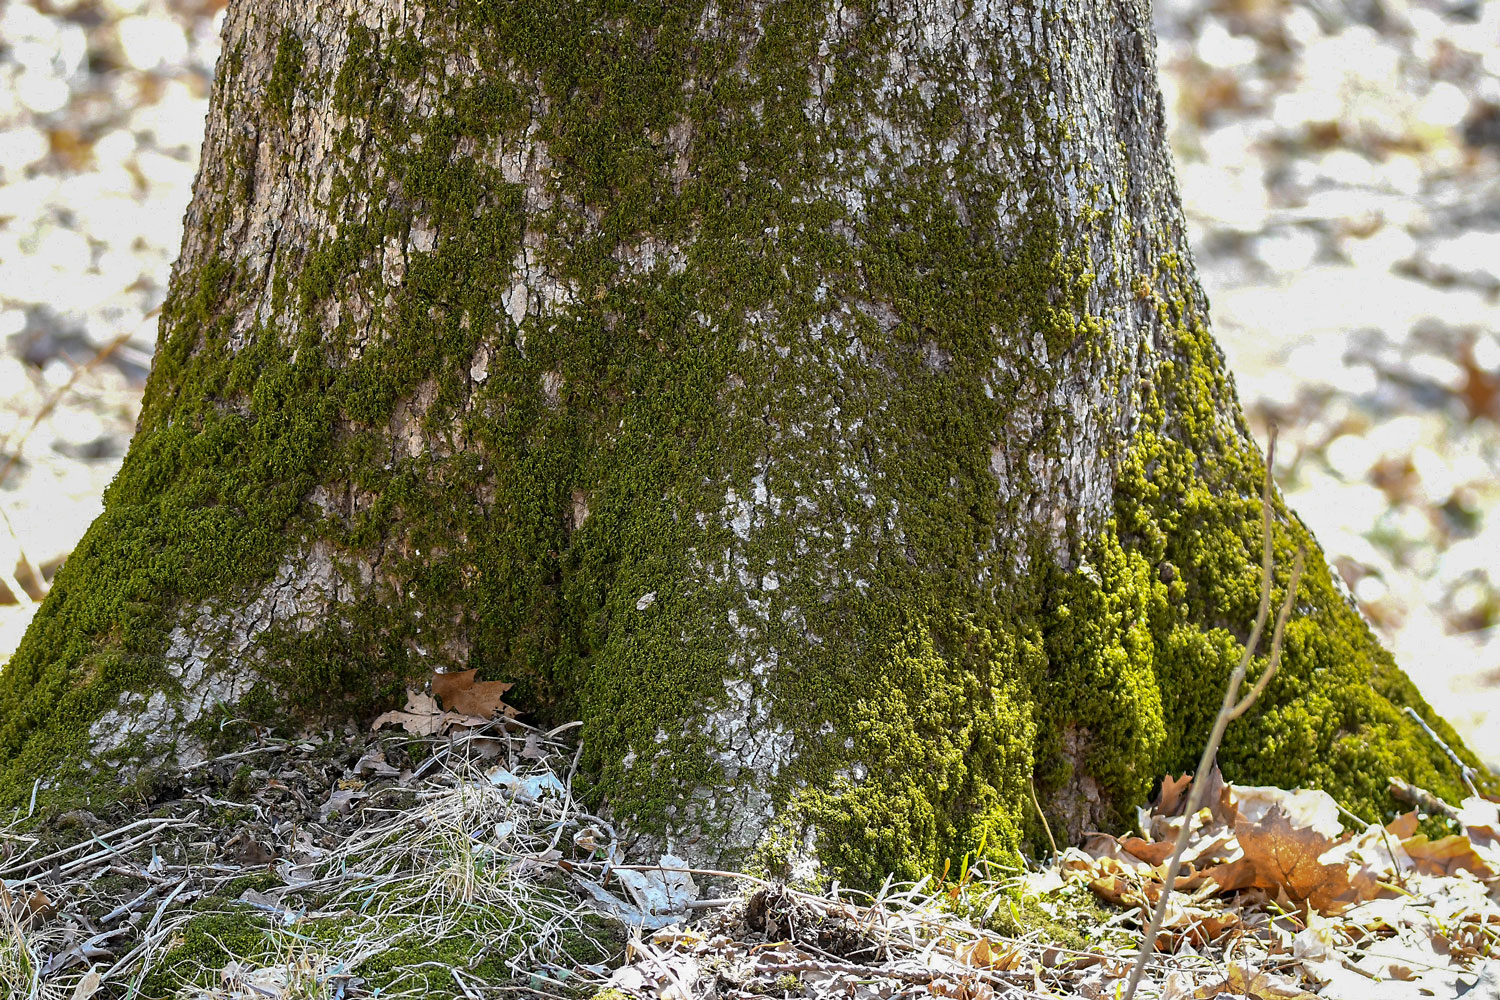 Myth buster: Moss doesn't only grow on the north side of trees